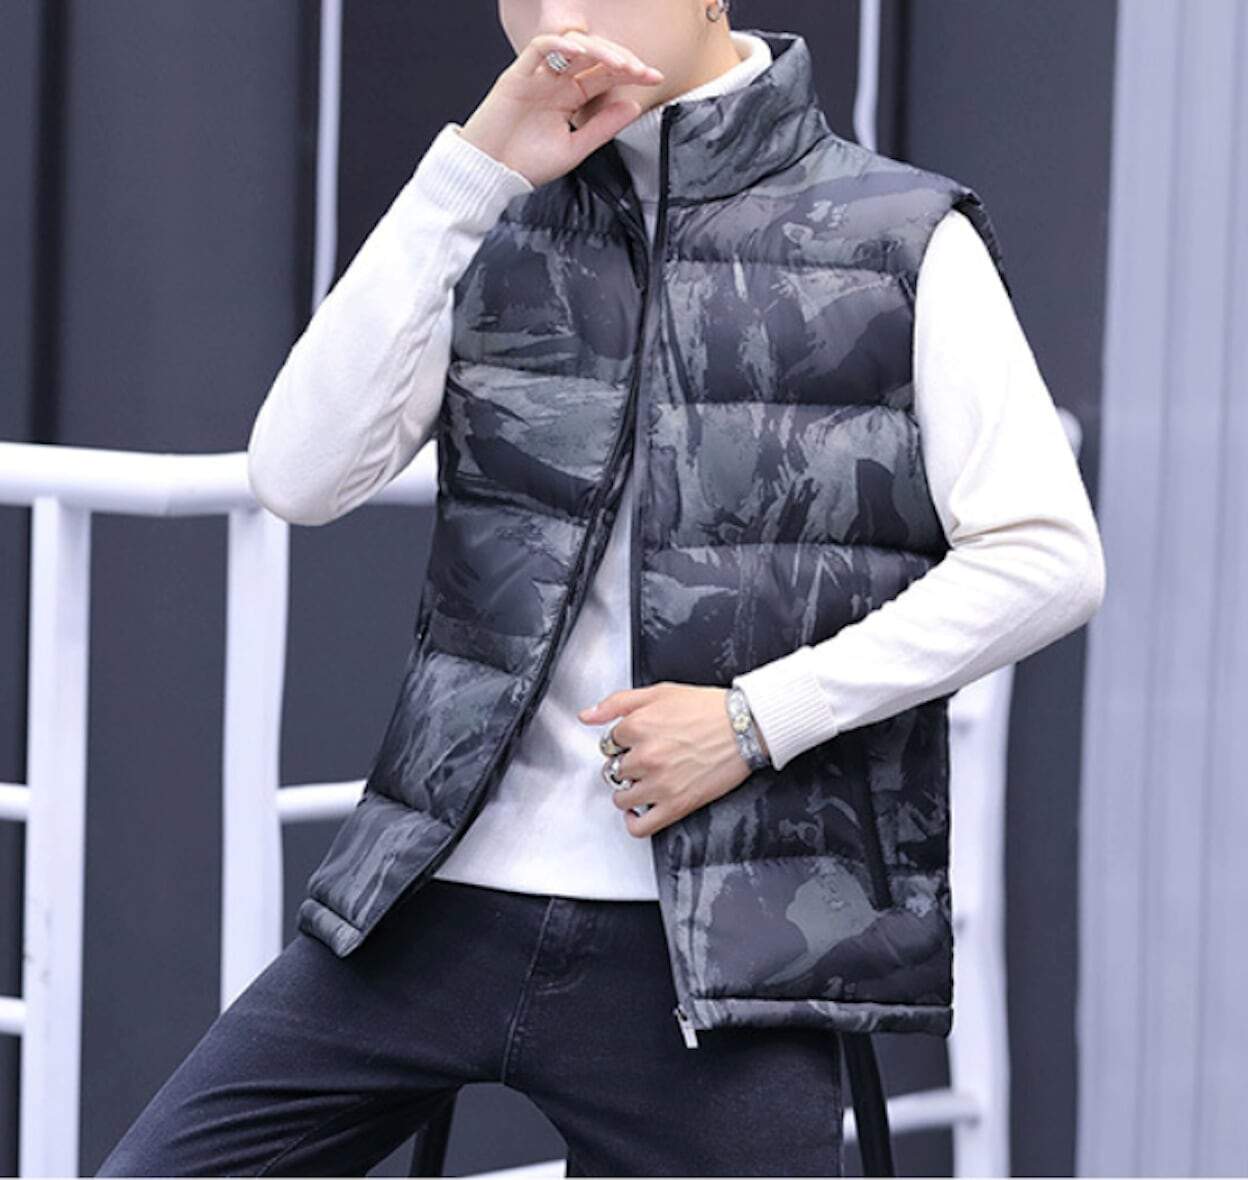 Mens Army Camo Puffer Vest - AmtifyDirect